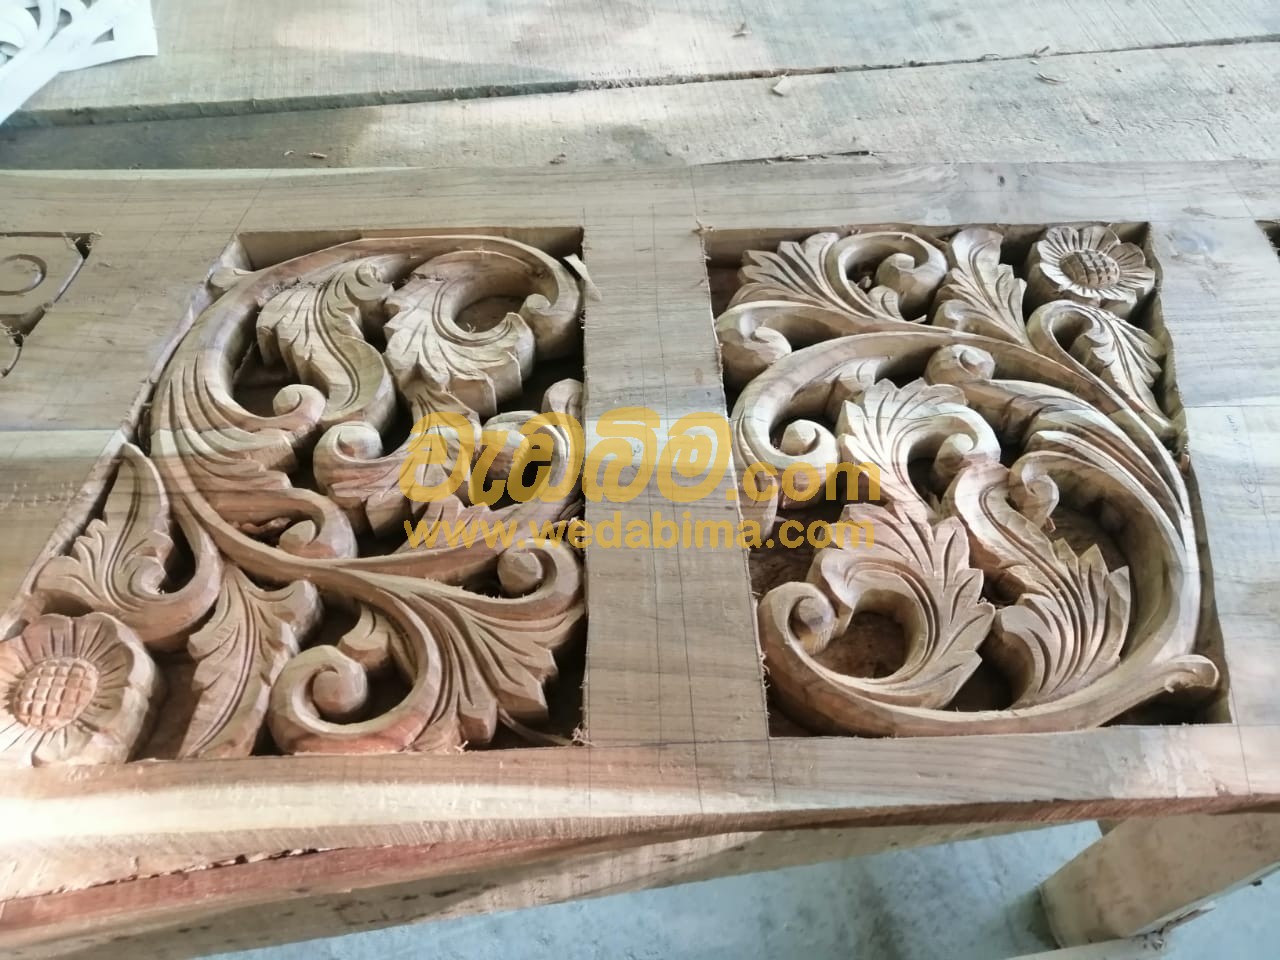 Wood Carving Designs - Kandy